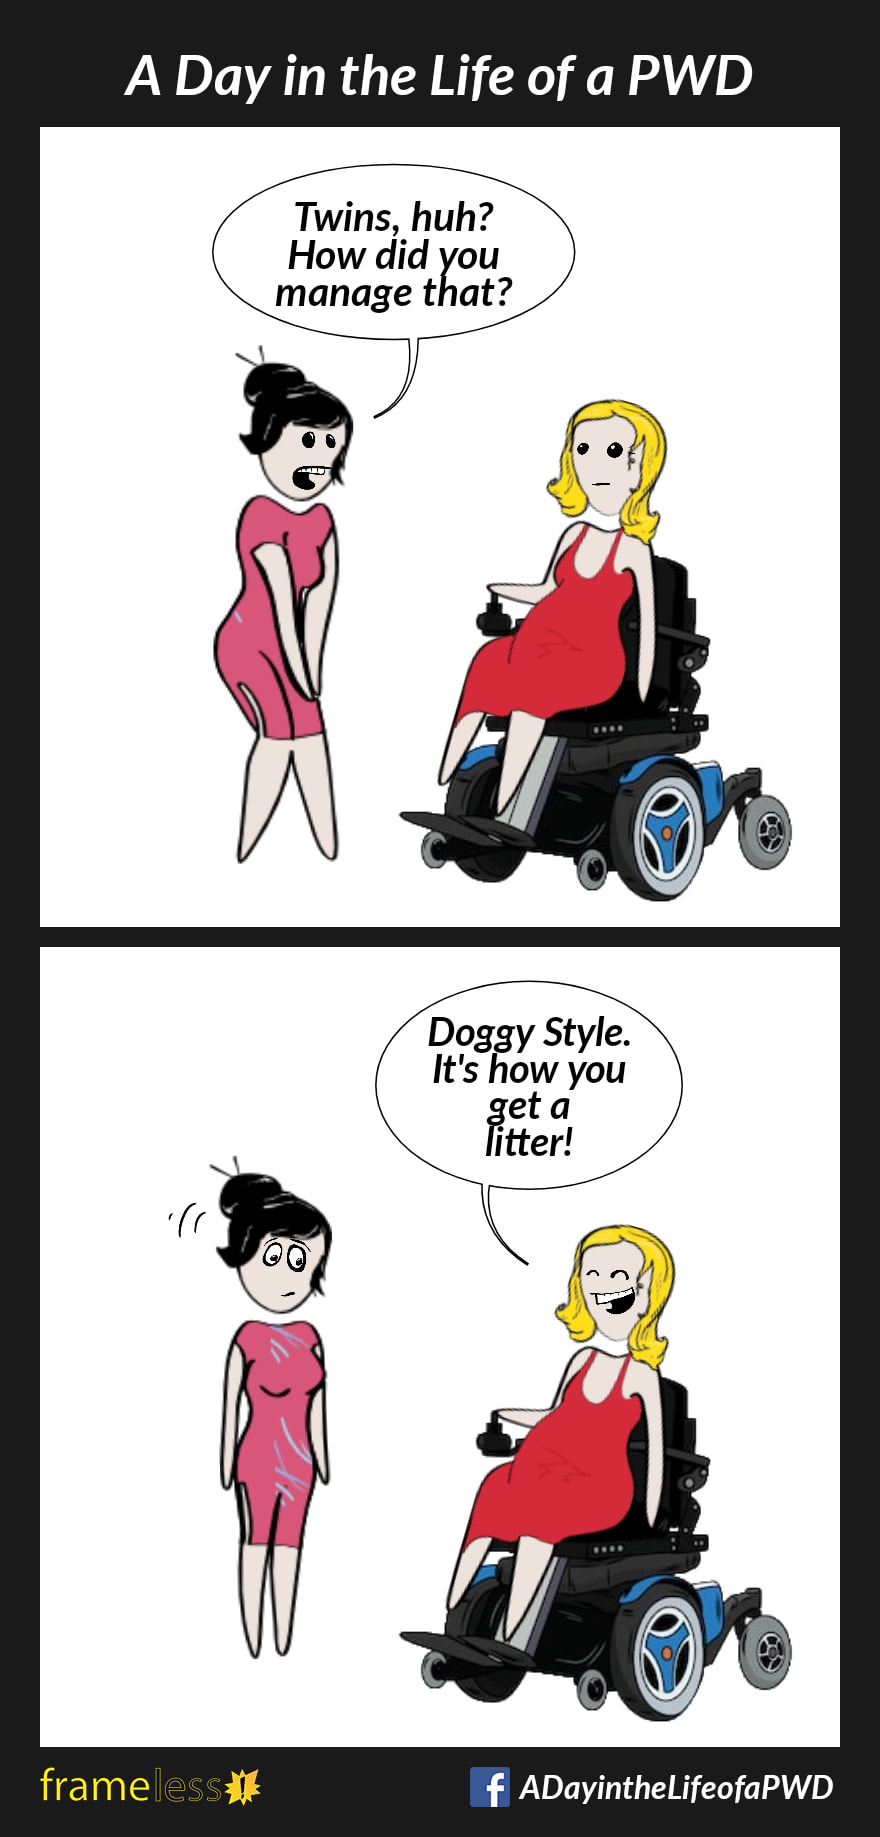 COMIC STRIP 
A Day in the Life of a PWD (Person With a Disability) 

Frame 1:
A pregnant woman in a wheelchair is chatting with an acquaintance. 
ACQUAINTANCE: Twins, huh? How did you manage that?

Frame 2:
WOMAN (grinning): Doggy Style. It's how you get a litter!